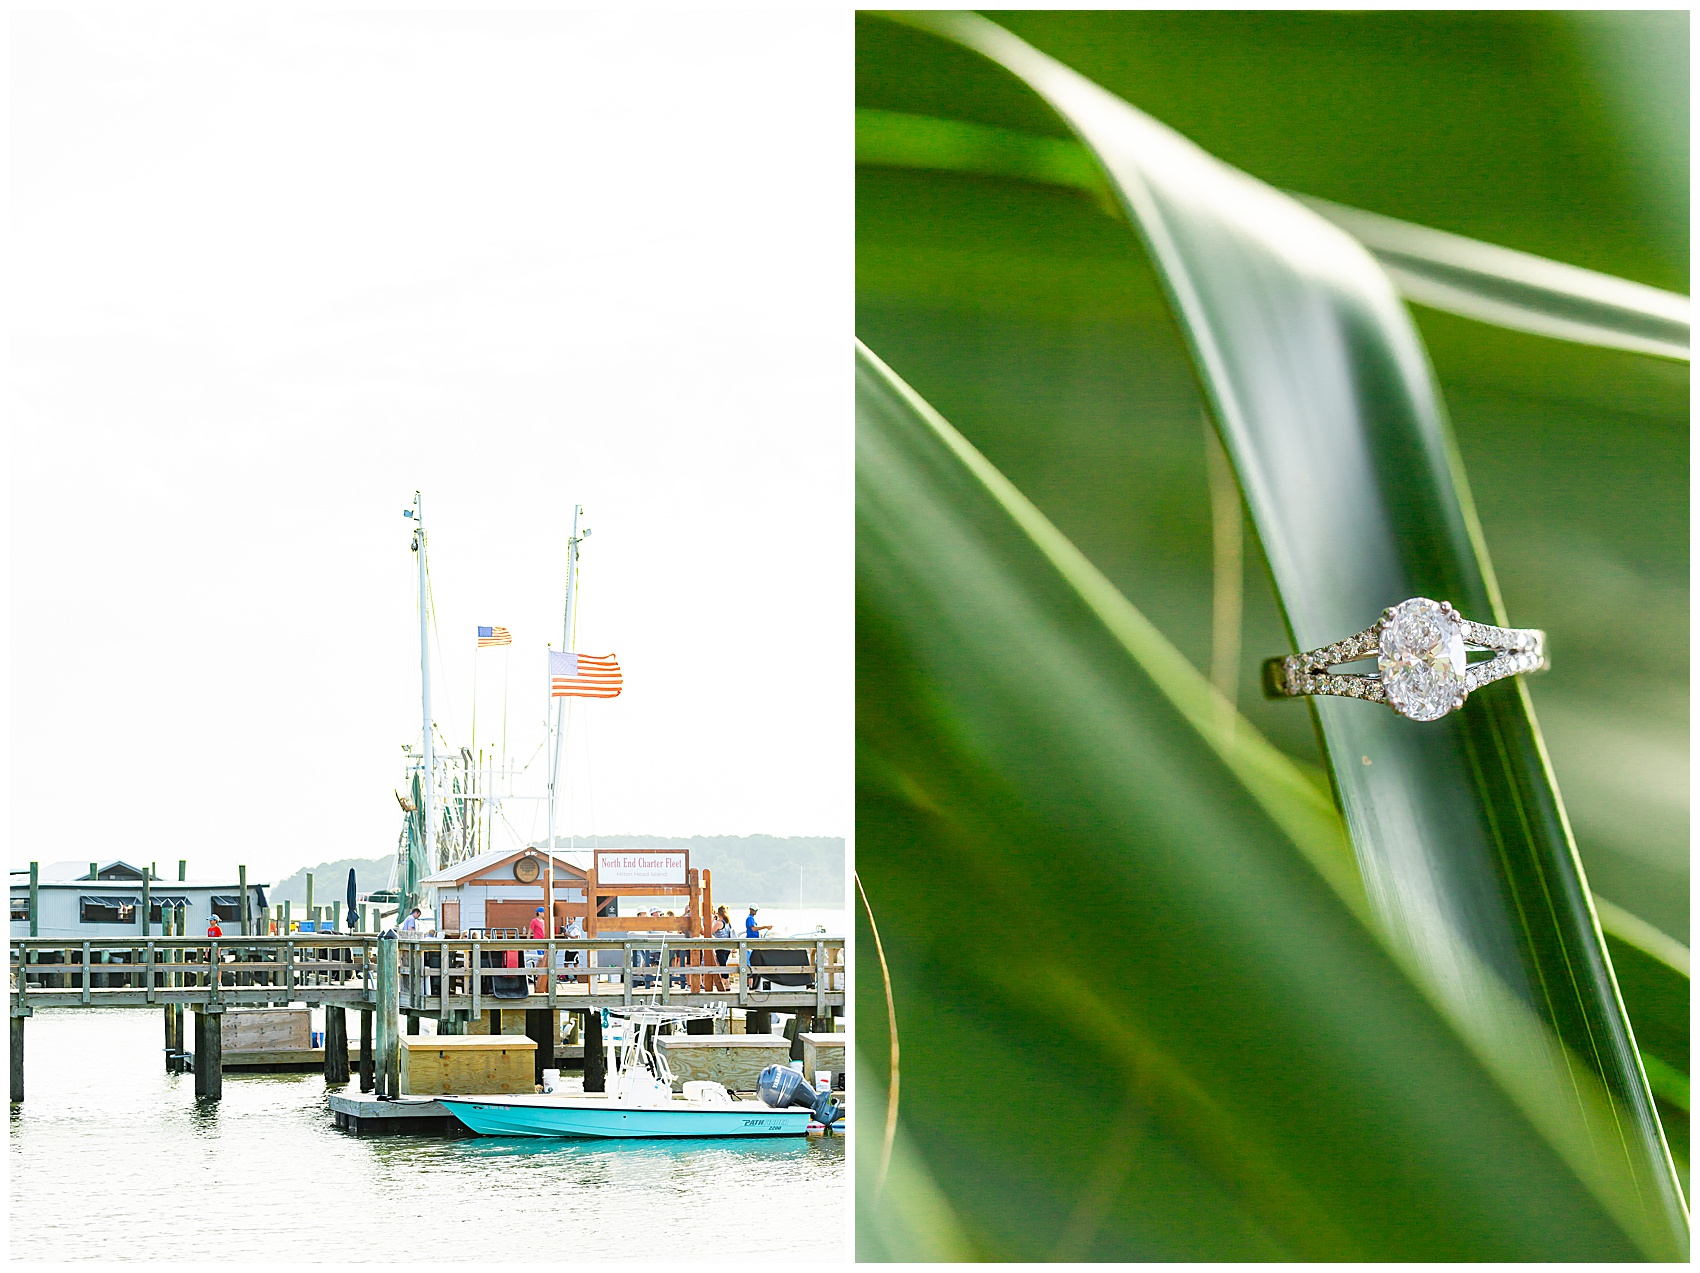 Engagement ring on a palm leaf